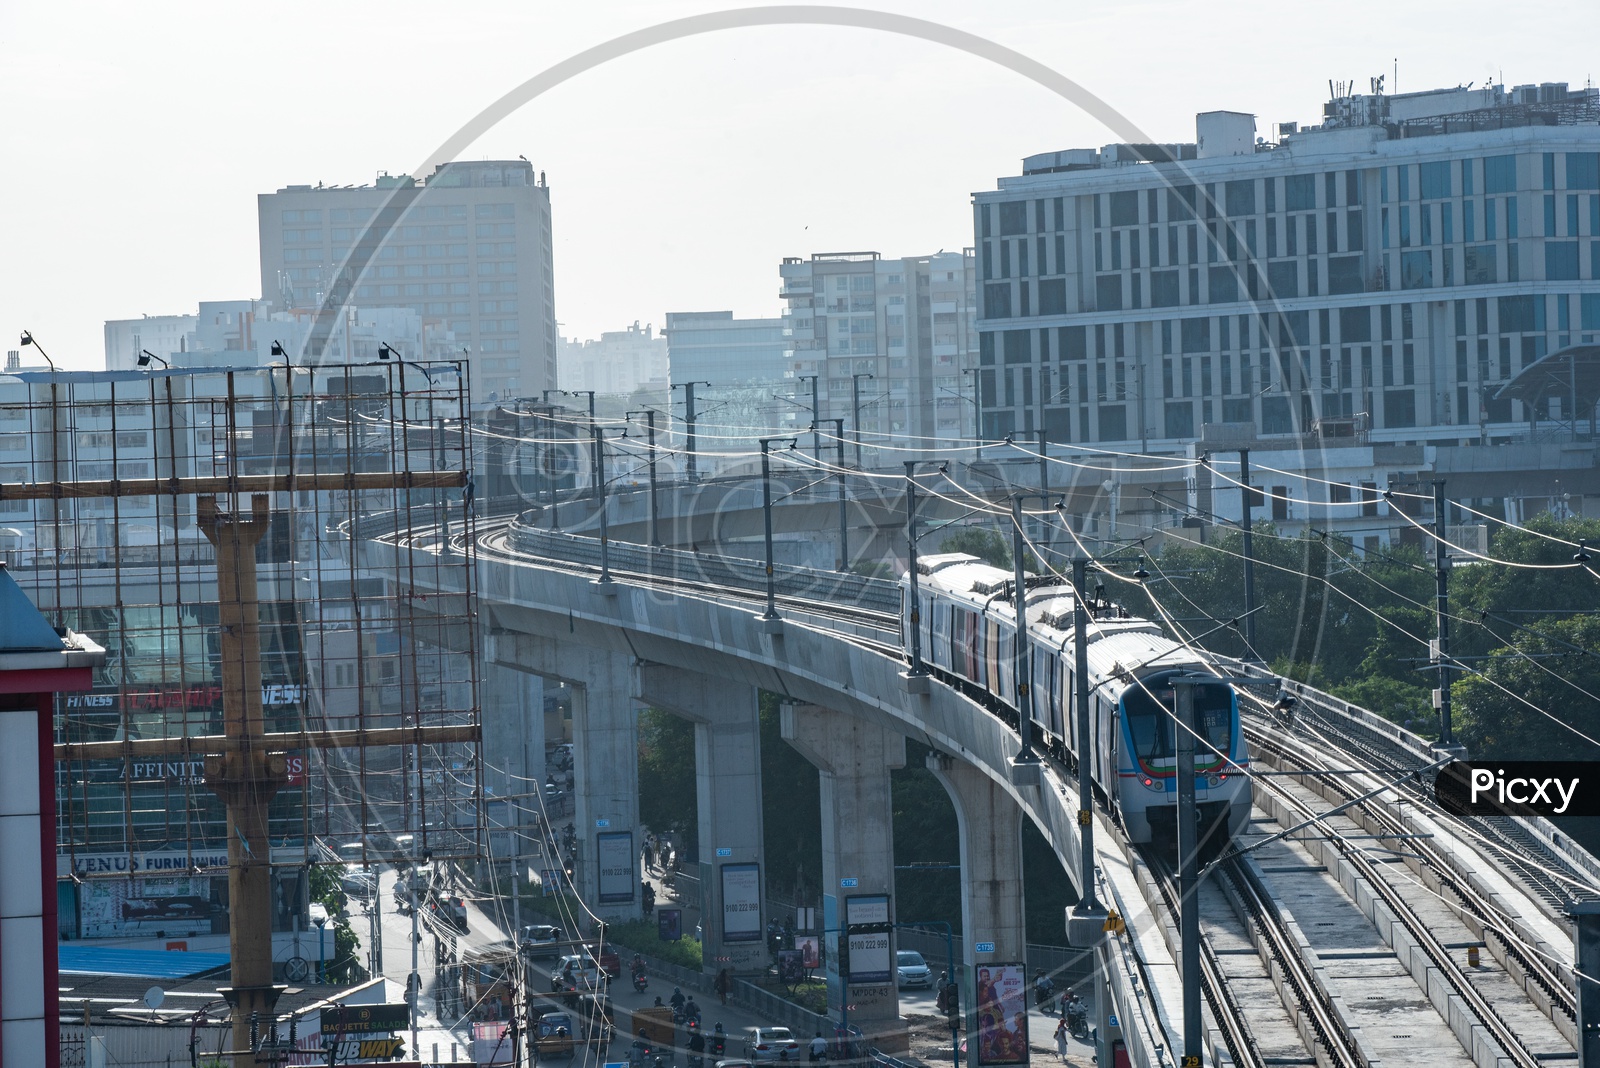 Hyderabad Metro train Running On Track With Buildings In Background